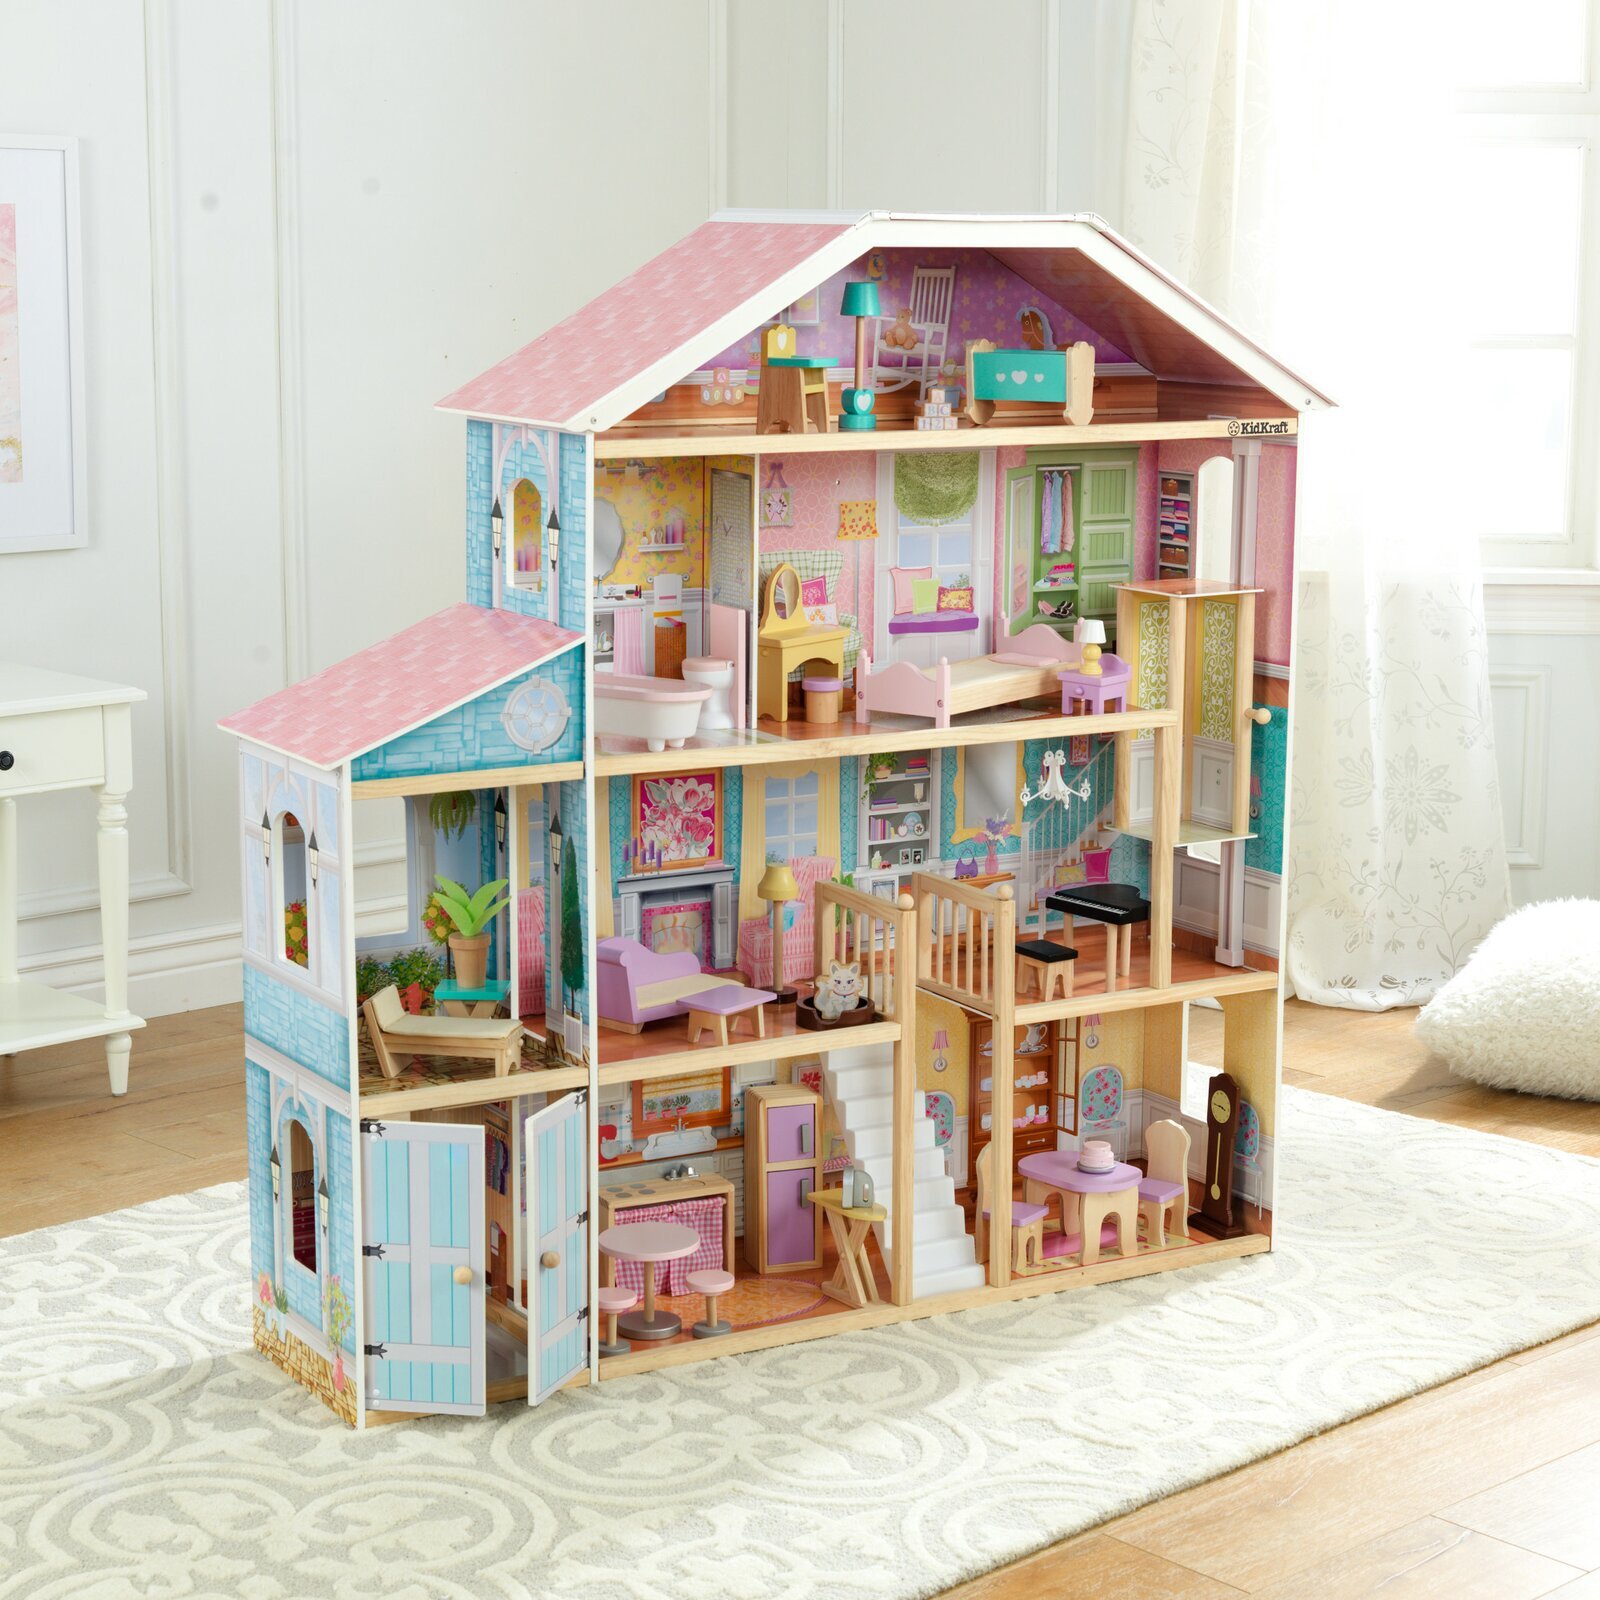 Extra Large Wooden Doll House with More Room Compartments